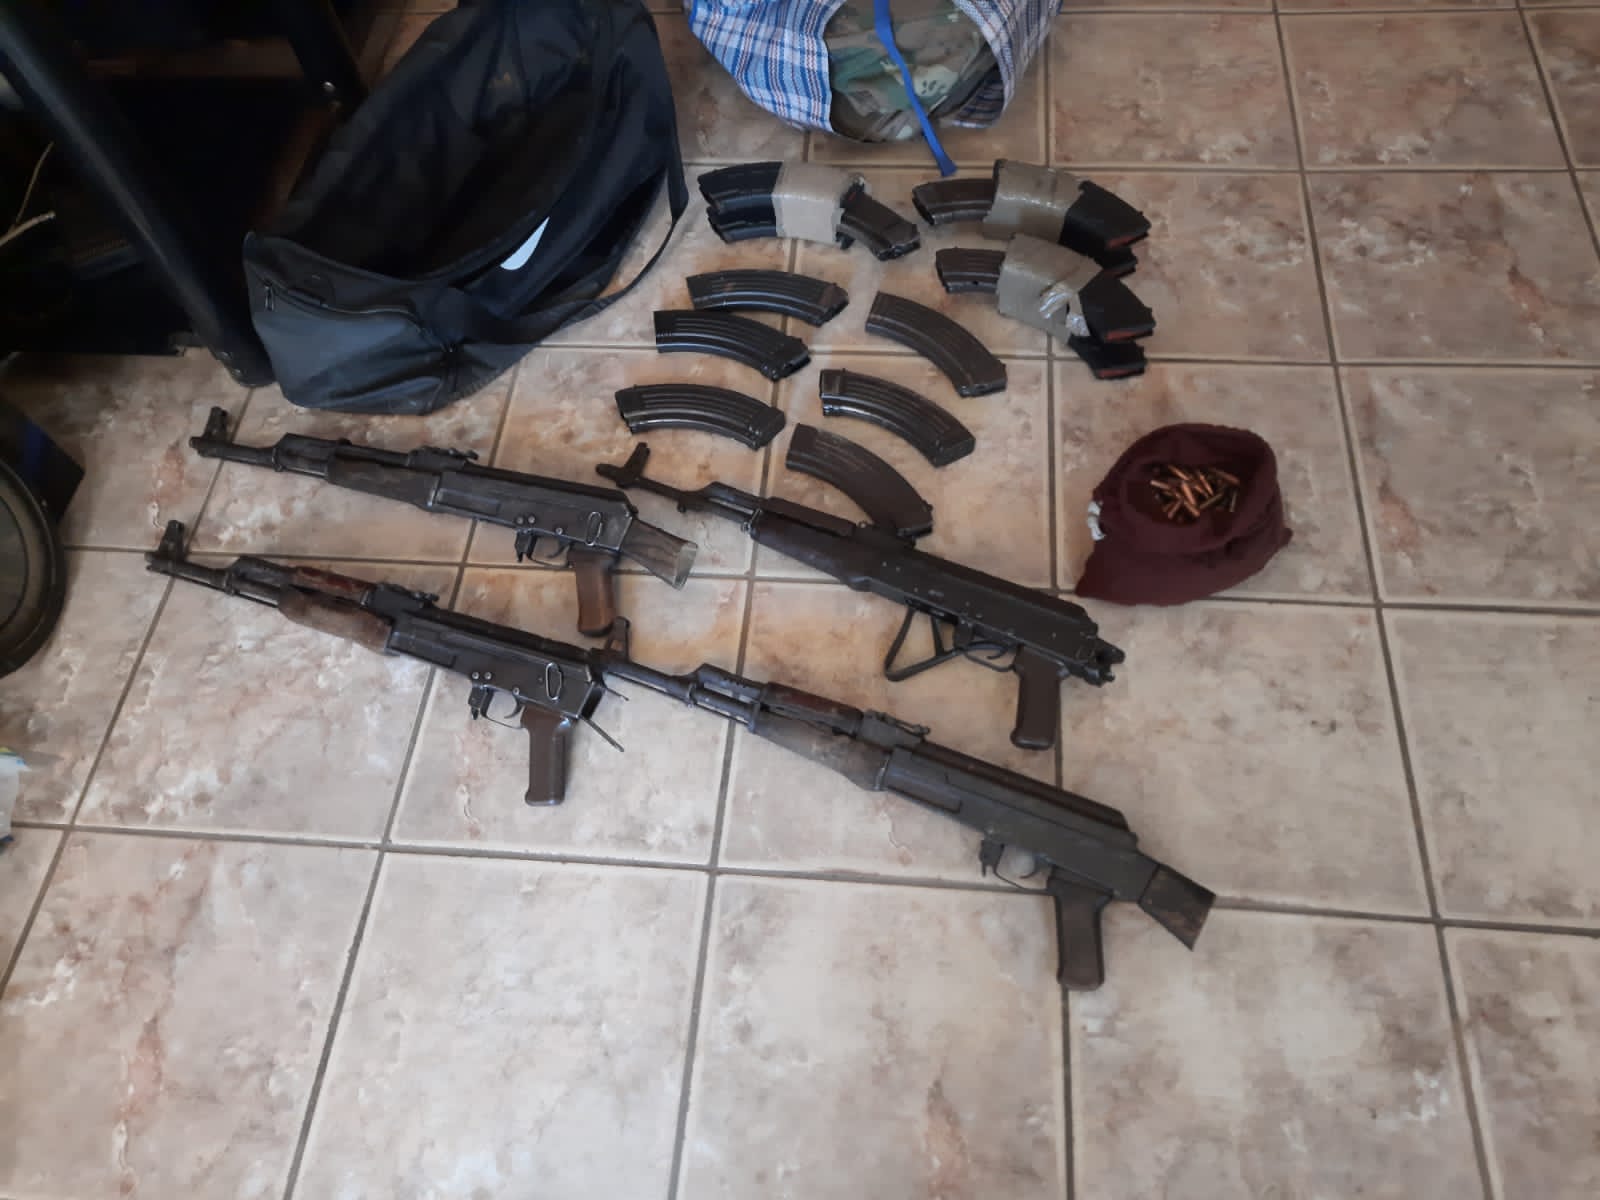 Thugs hide several guns and explosives in a house